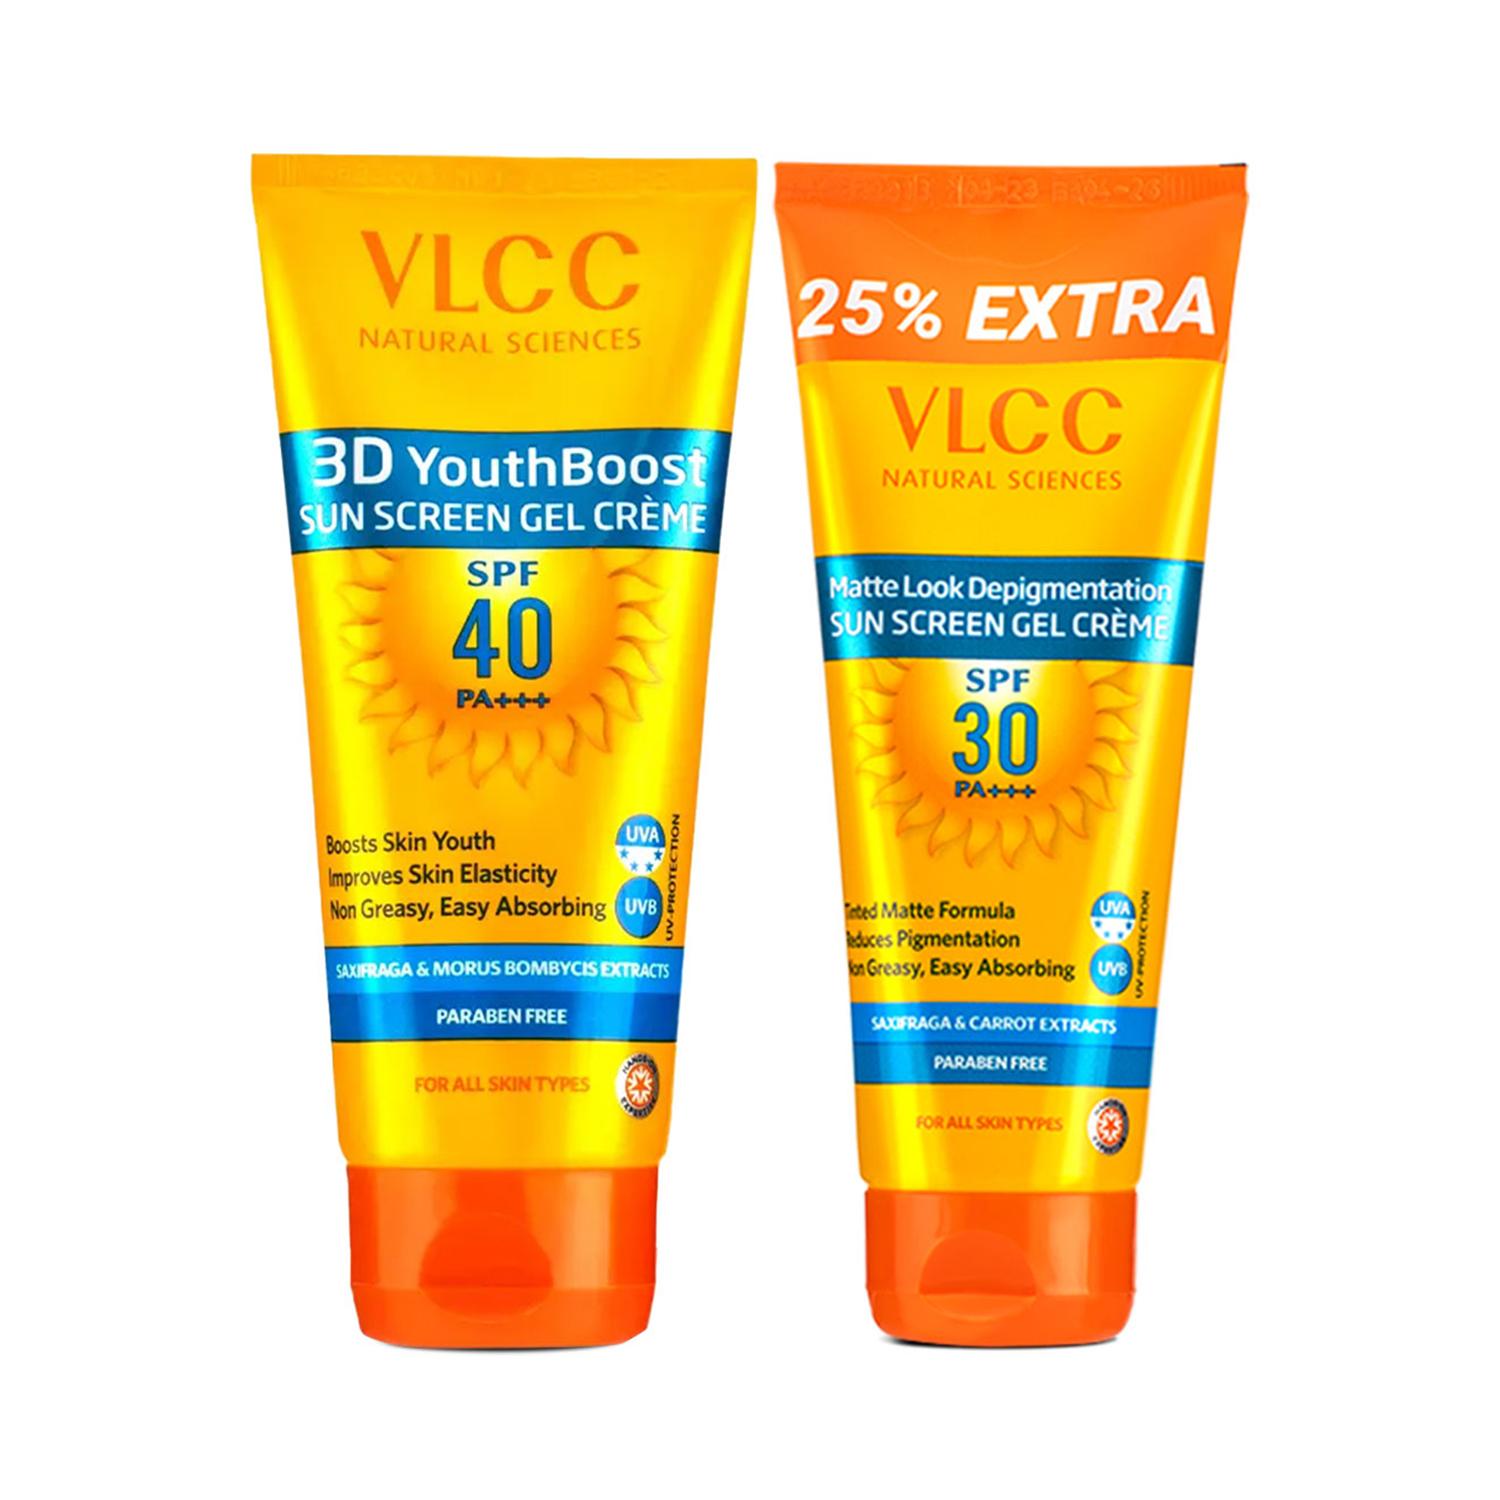 VLCC | VLCC Matte Look SPF 30 PA+++ & 3D Youth Boost SPF40 +++ Sunscreen Combo